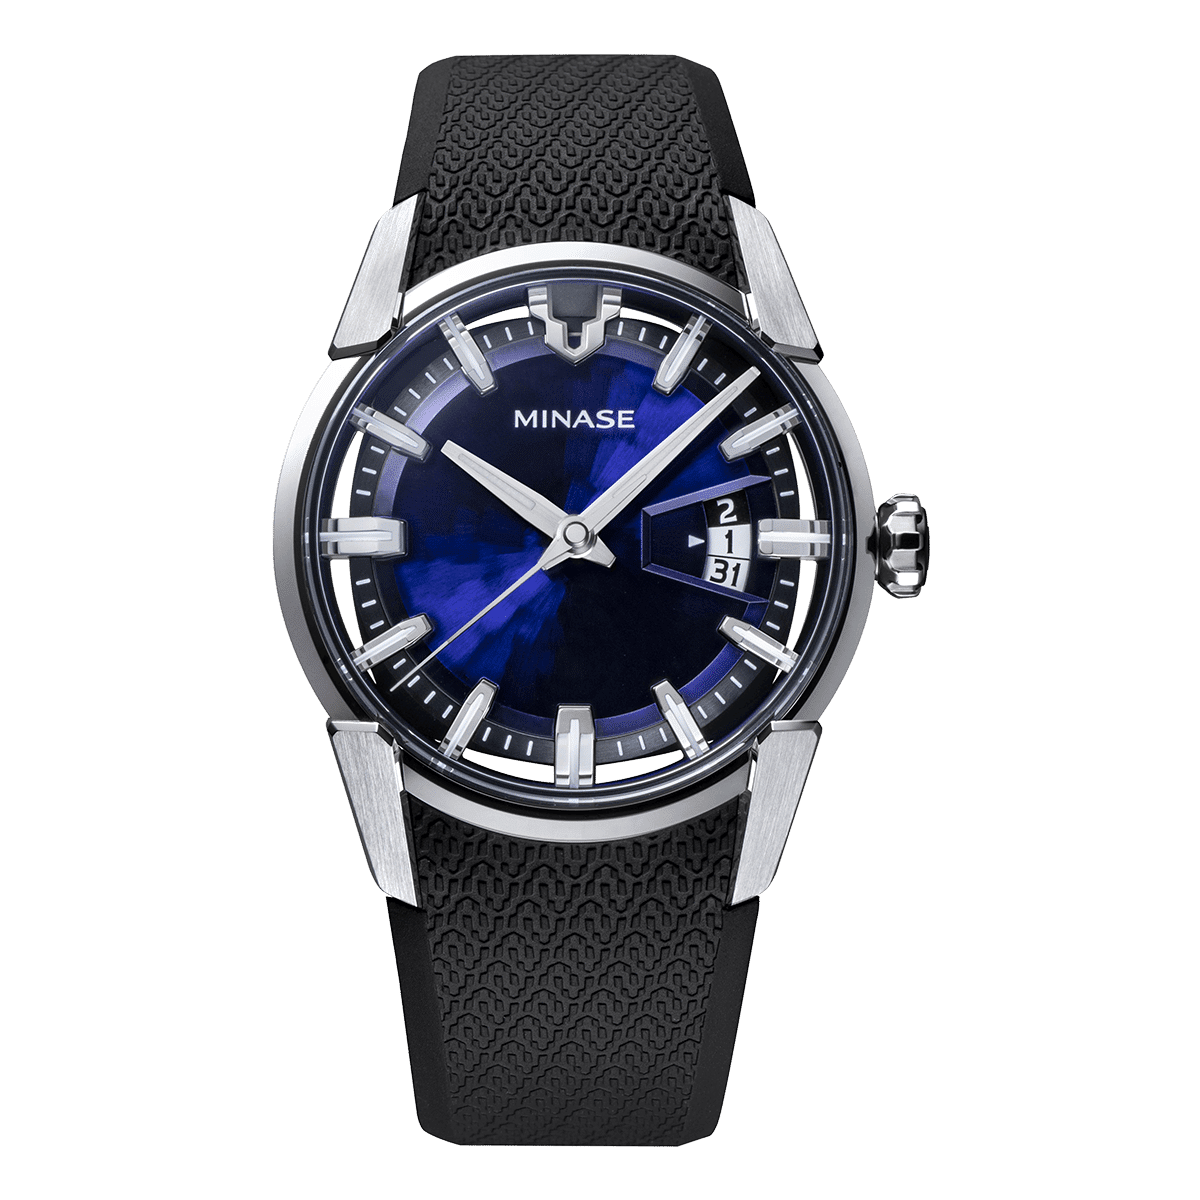 Minase watch with ocean blue dial on rubber band